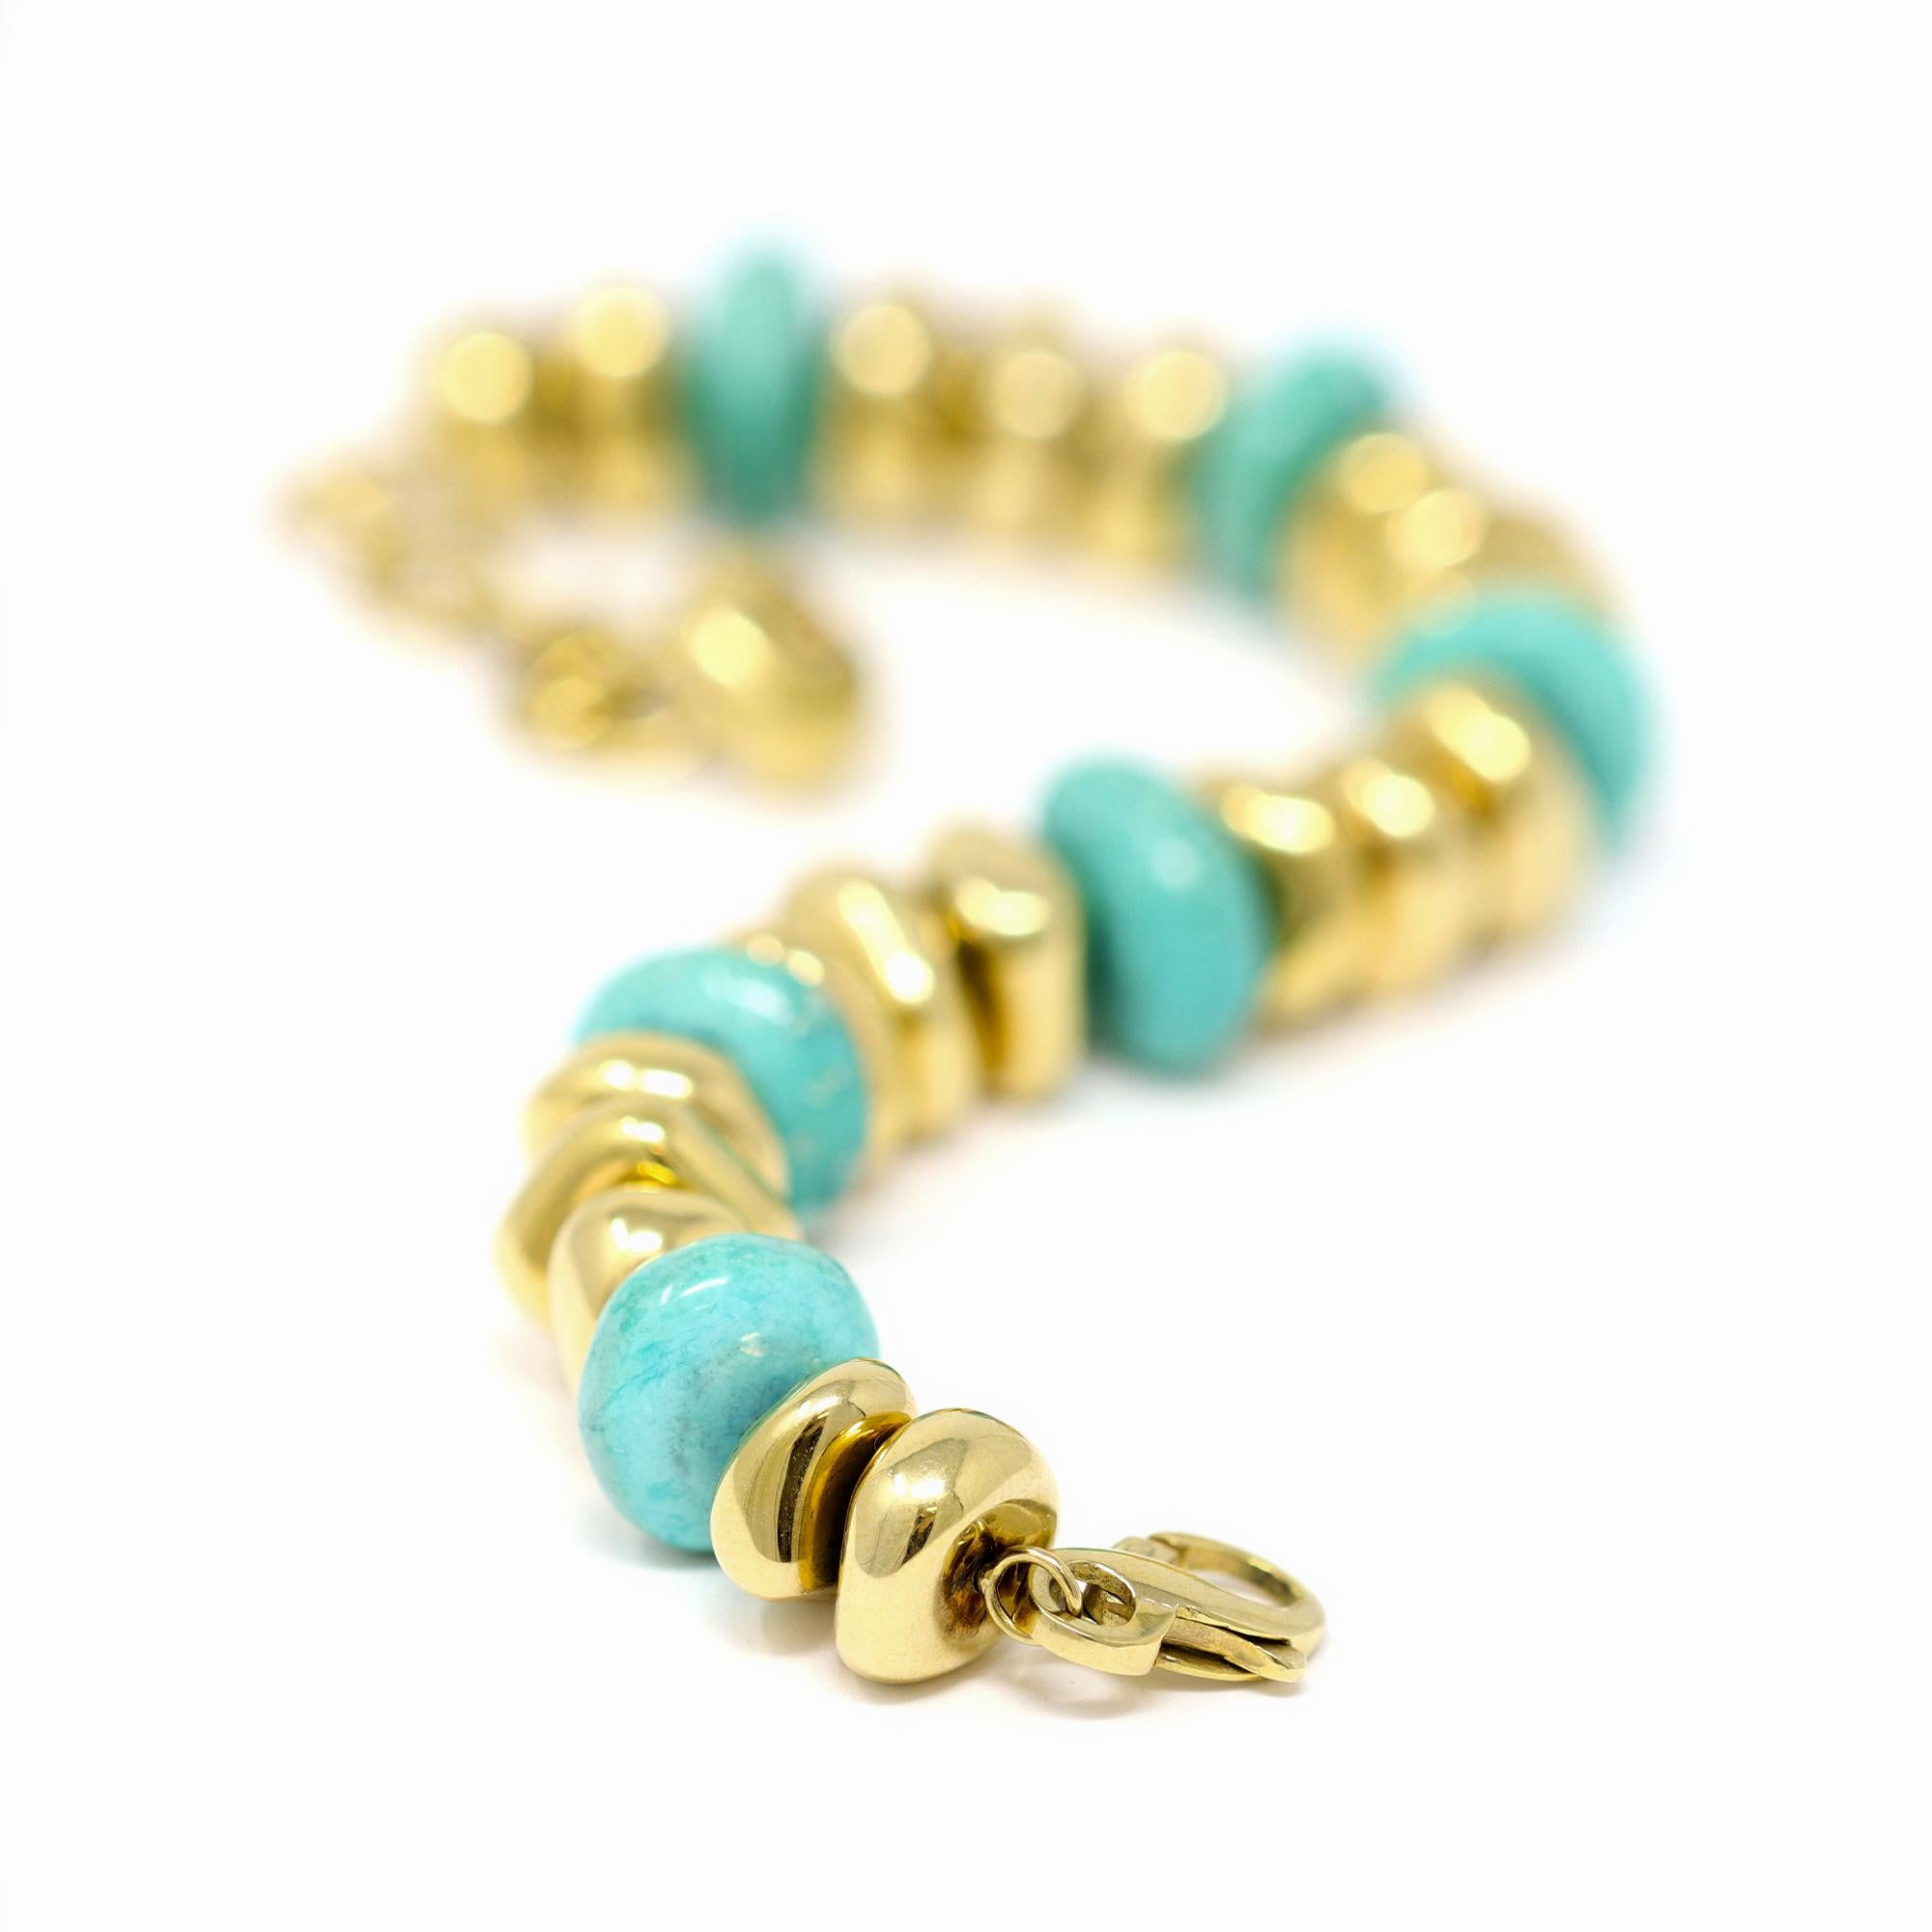 A fun bracelet originated in Italy presenting turquoise and gold beads all pebble shape. The bracelet is made in 18 karat yellow gold and sits very comfortably on the wrist. It weights 36.5 grams and is 8